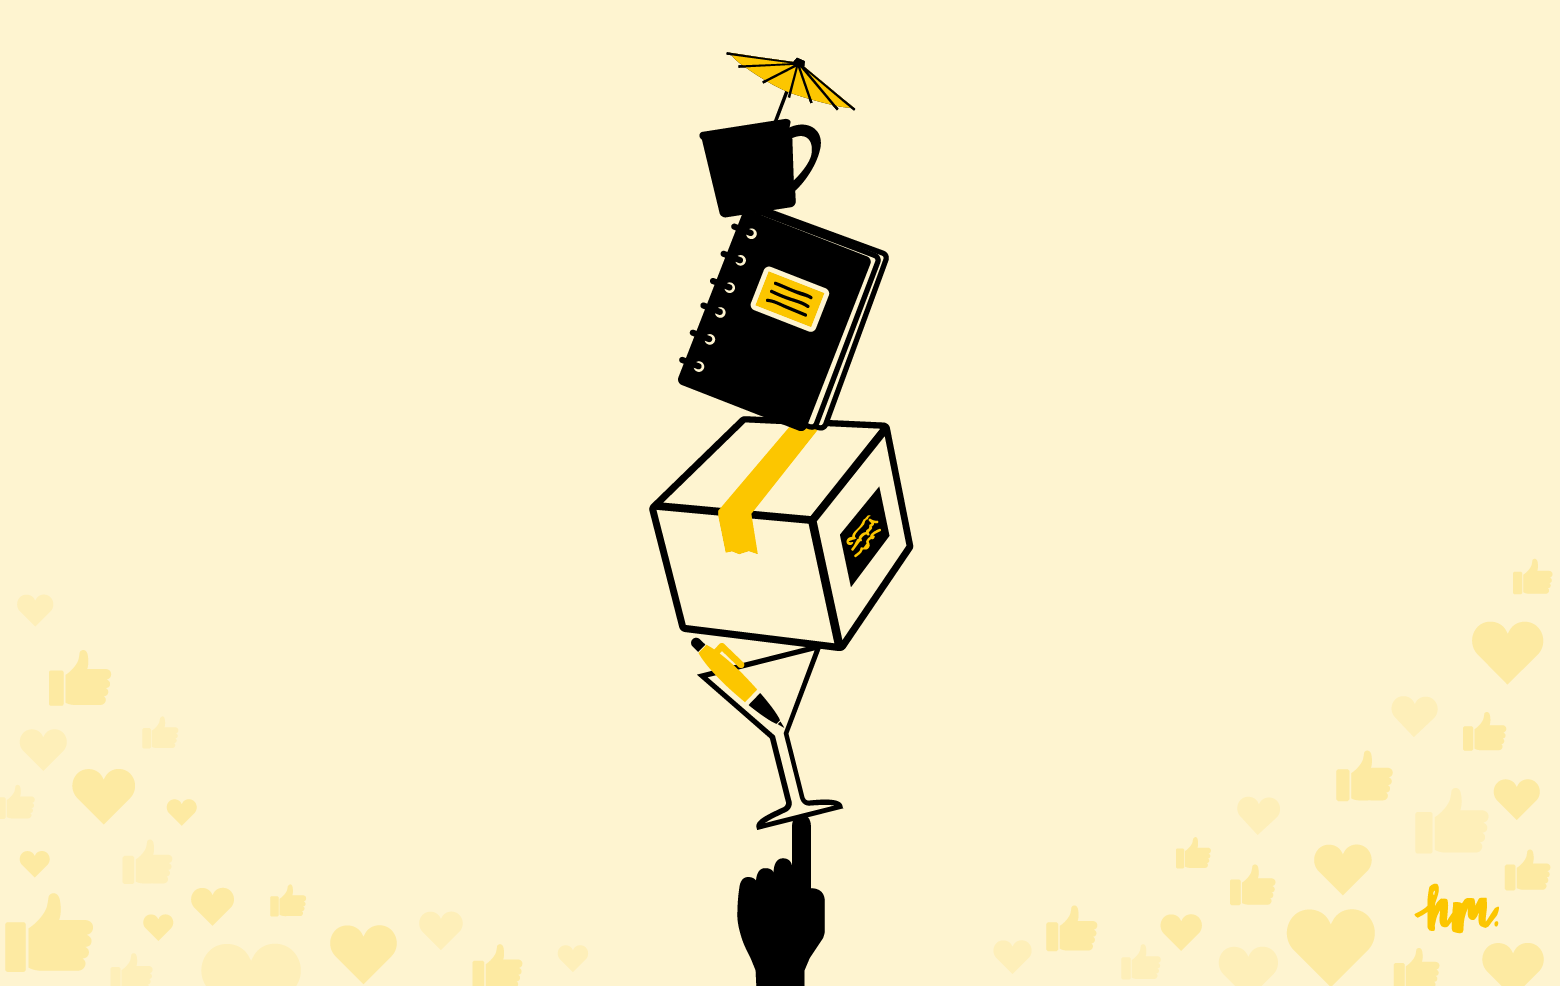 Illustration of one finger balancing a martini glass with a ballpoint pen inside, a box with a label, a journal with an address label, and a coffee cup with a cocktail umbrella.